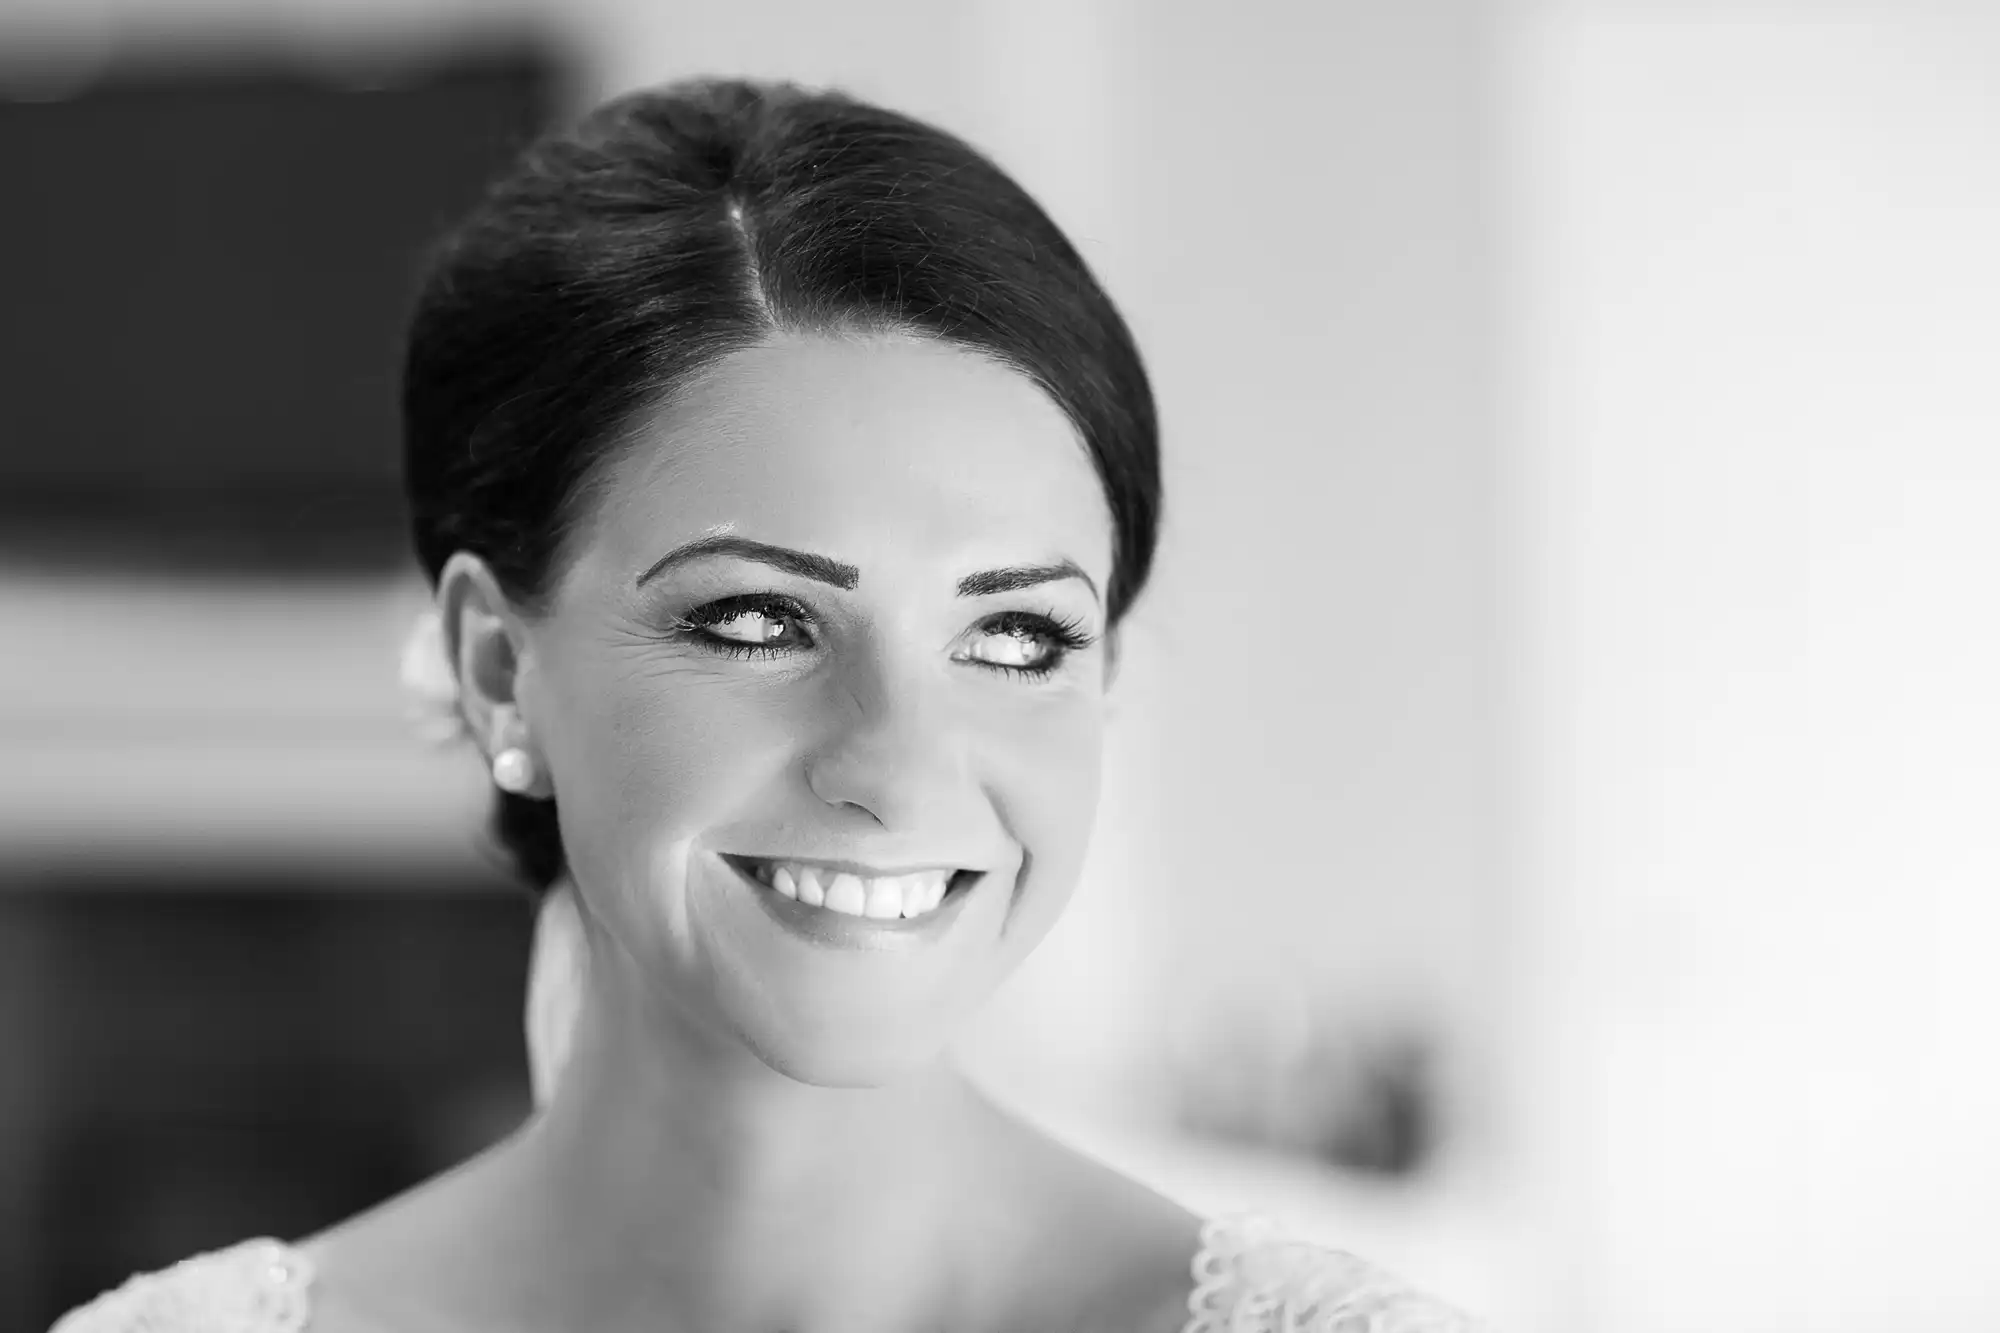 Black and white photo of a smiling woman with dark hair in an elegant updo, wearing a lacy dress.